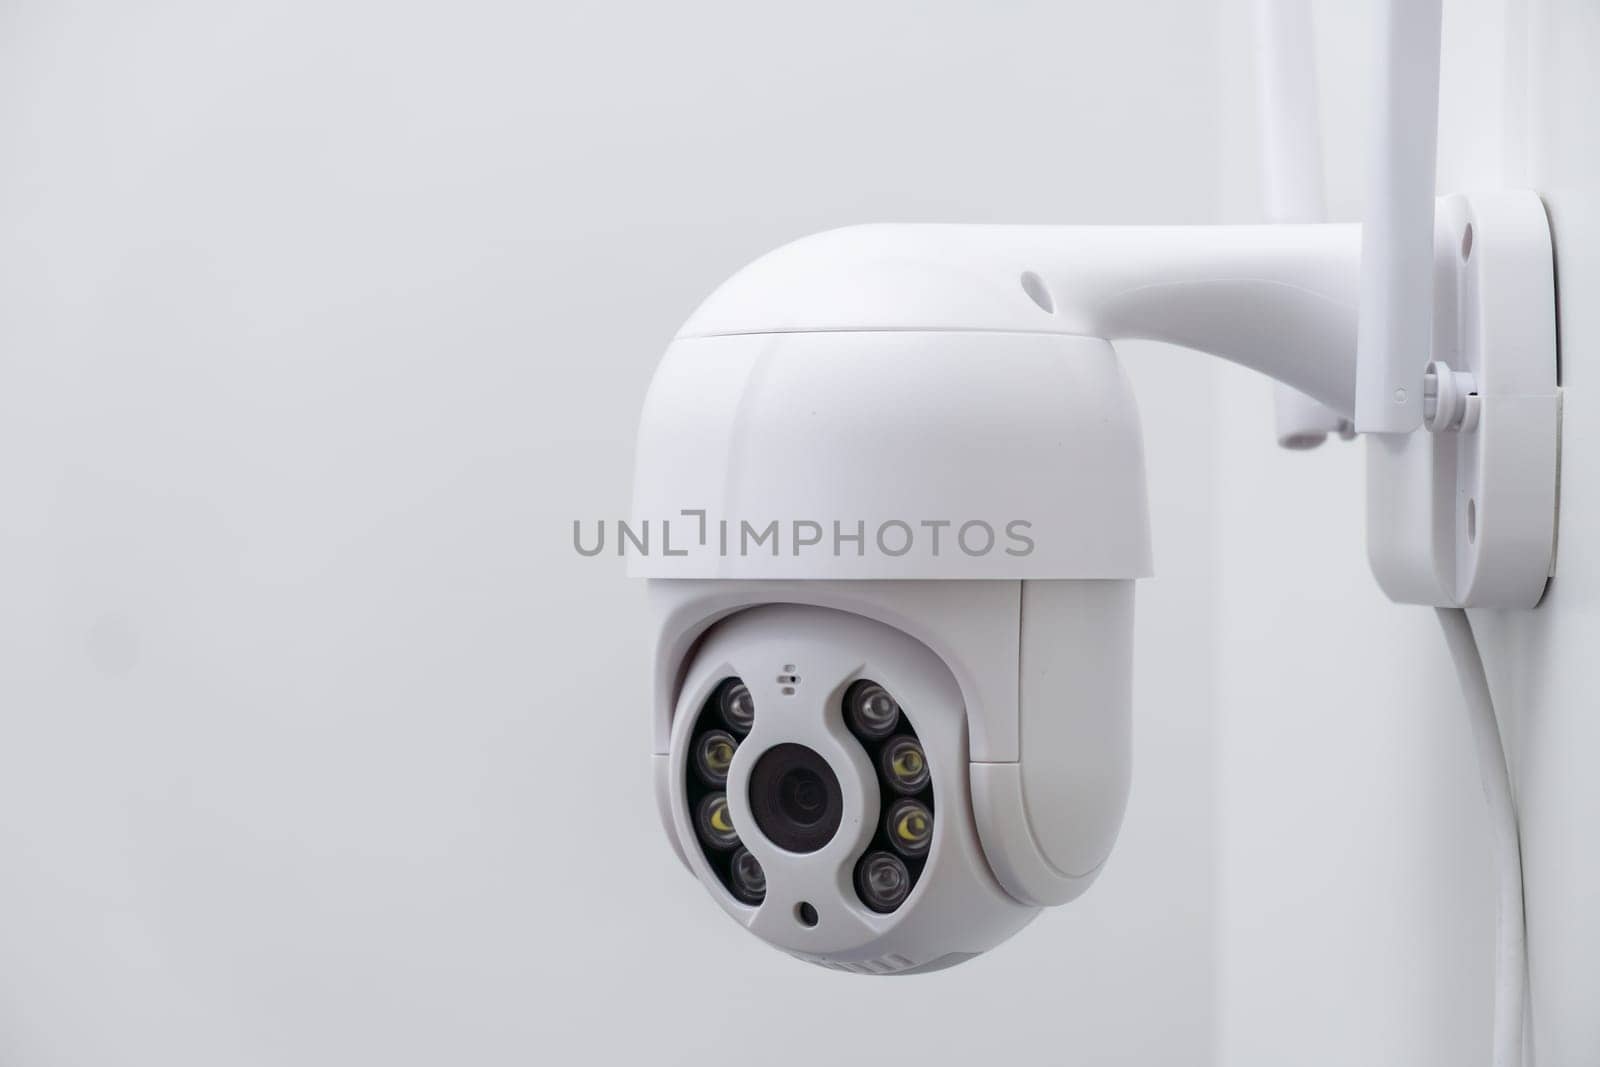 Round CCTV camera with antennas shoots video on the white wall. Digital equipment to record and broadcast real time video closeup